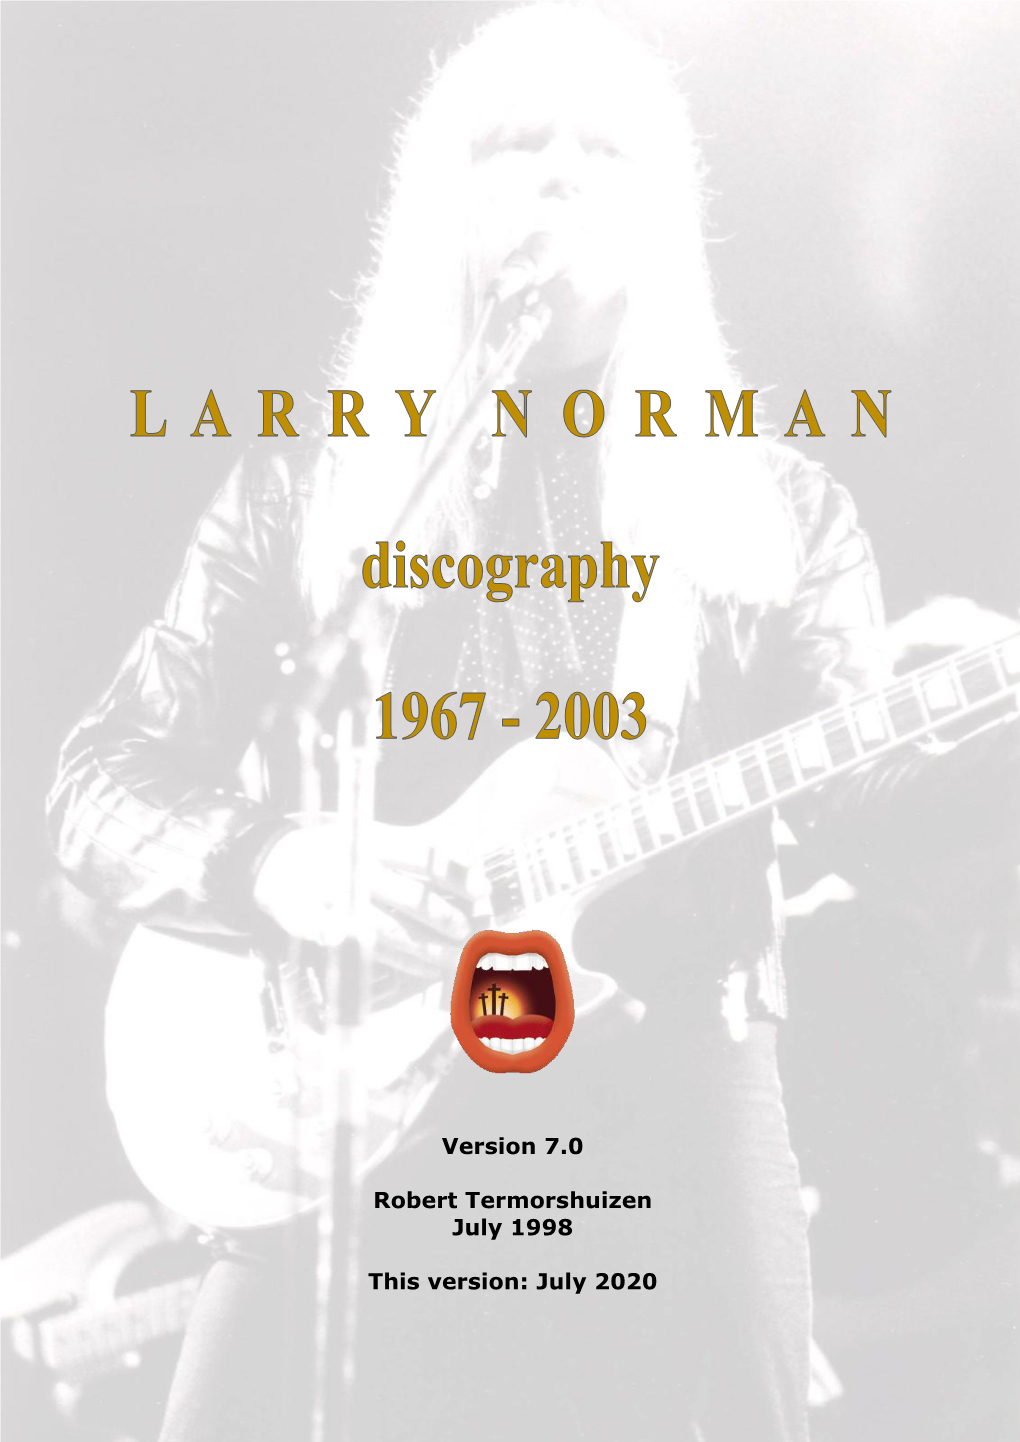 A Larry Norman Discography